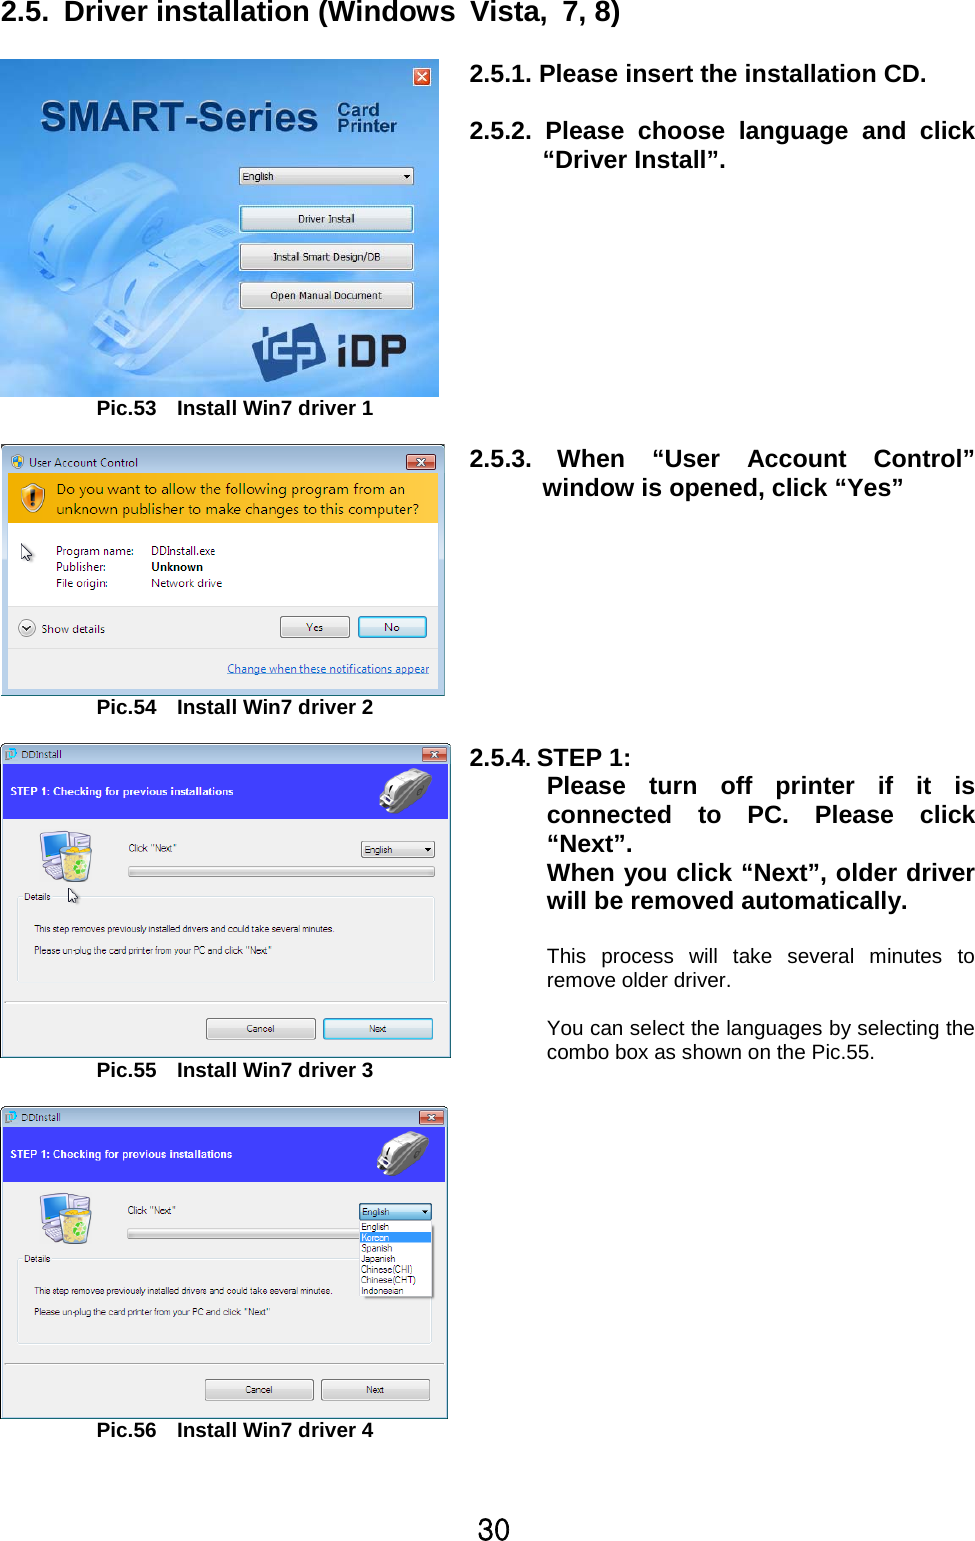 ZW2.5. Driver installation (Windows Vista, 7, 8)Pic.53 Install Win7 driver 12.5.1. Please insert the installation CD.2.5.2. Please choose language and click“Driver Install”.Pic.54 Install Win7 driver 22.5.3.When “User Account Control”window is opened, click “Yes”Pic.55 Install Win7 driver 3Pic.56 Install Win7 driver 42.5.4.STEP 1:Please turn off printer if it isconnected to PC. Please click“Next”.When you click “Next”, older driverwill be removed automatically.This process will take several minutes toremove older driver.You can select the languages by selecting thecombo box as shown on the Pic.55.